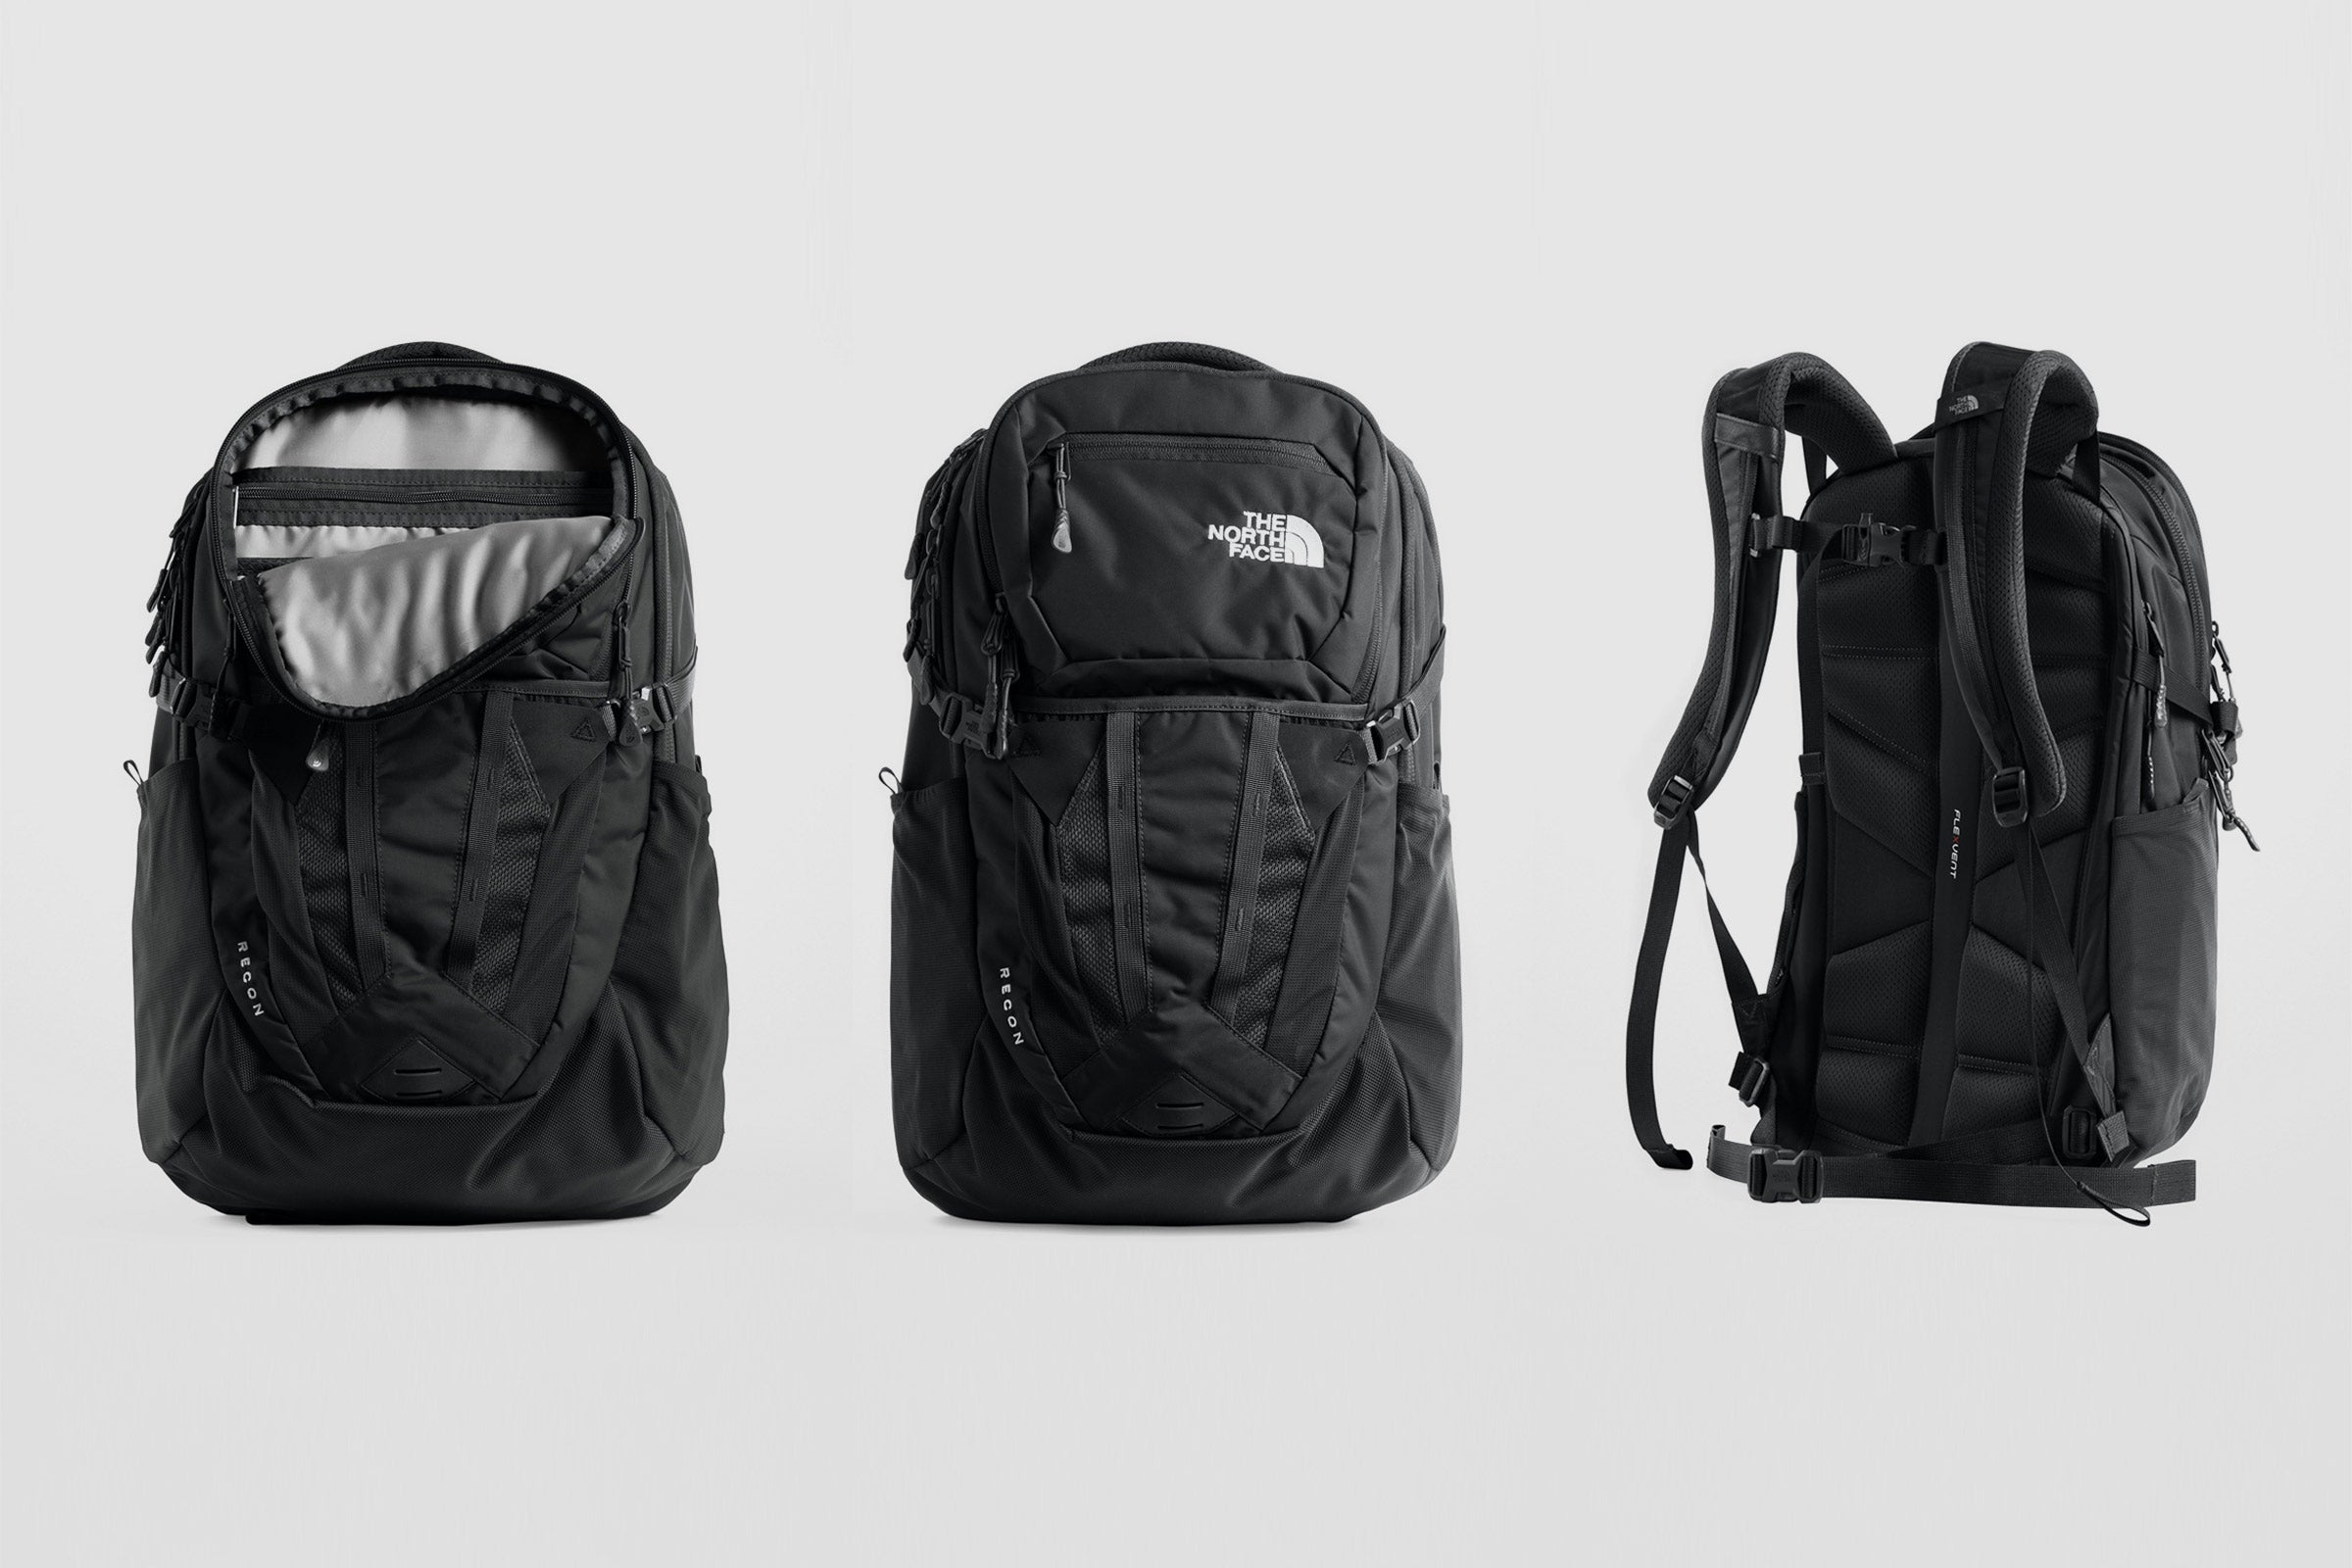 The North Face Recon, The Go-To Option 